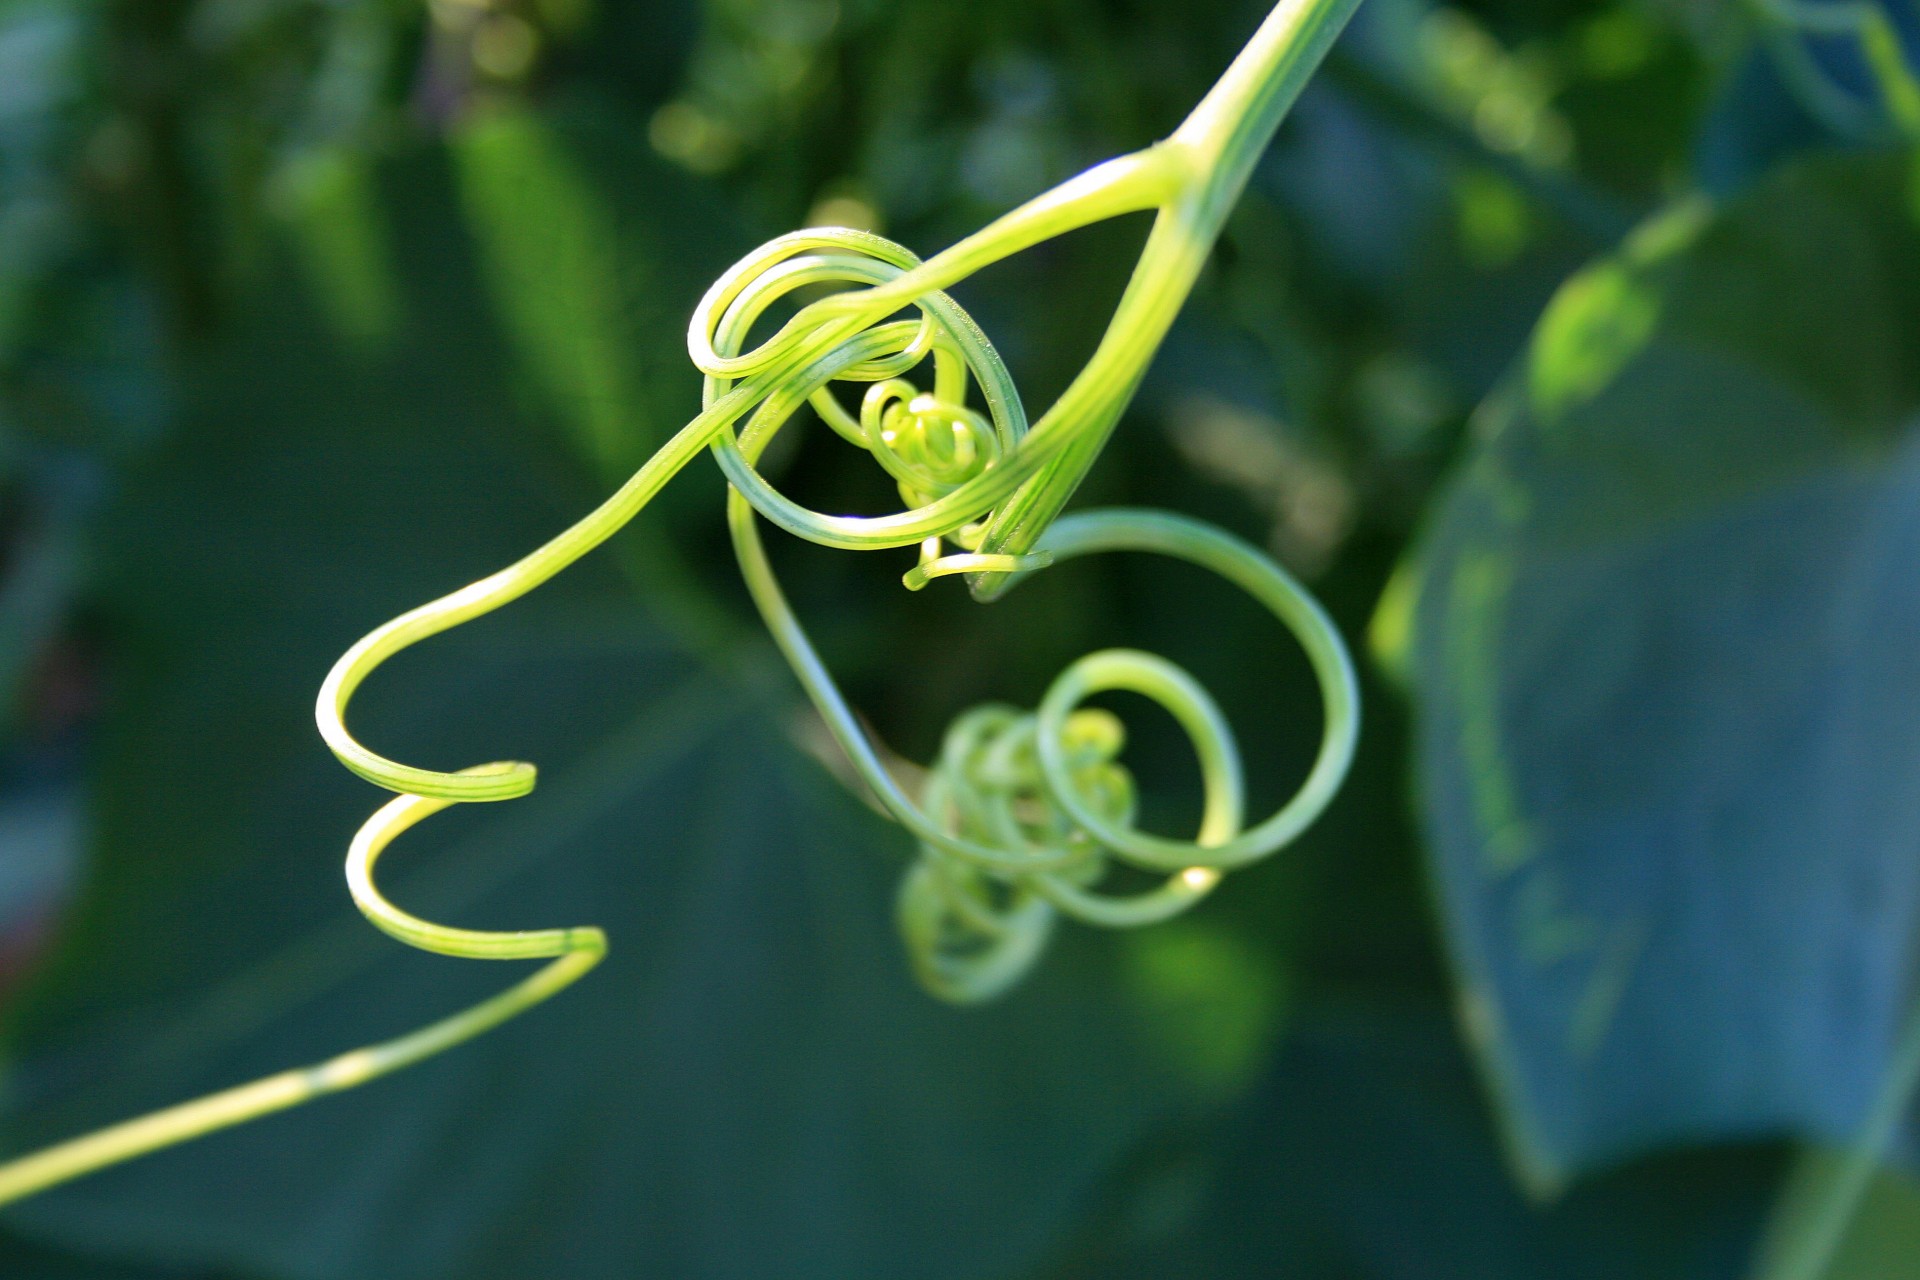 curly curvy tendril free photo